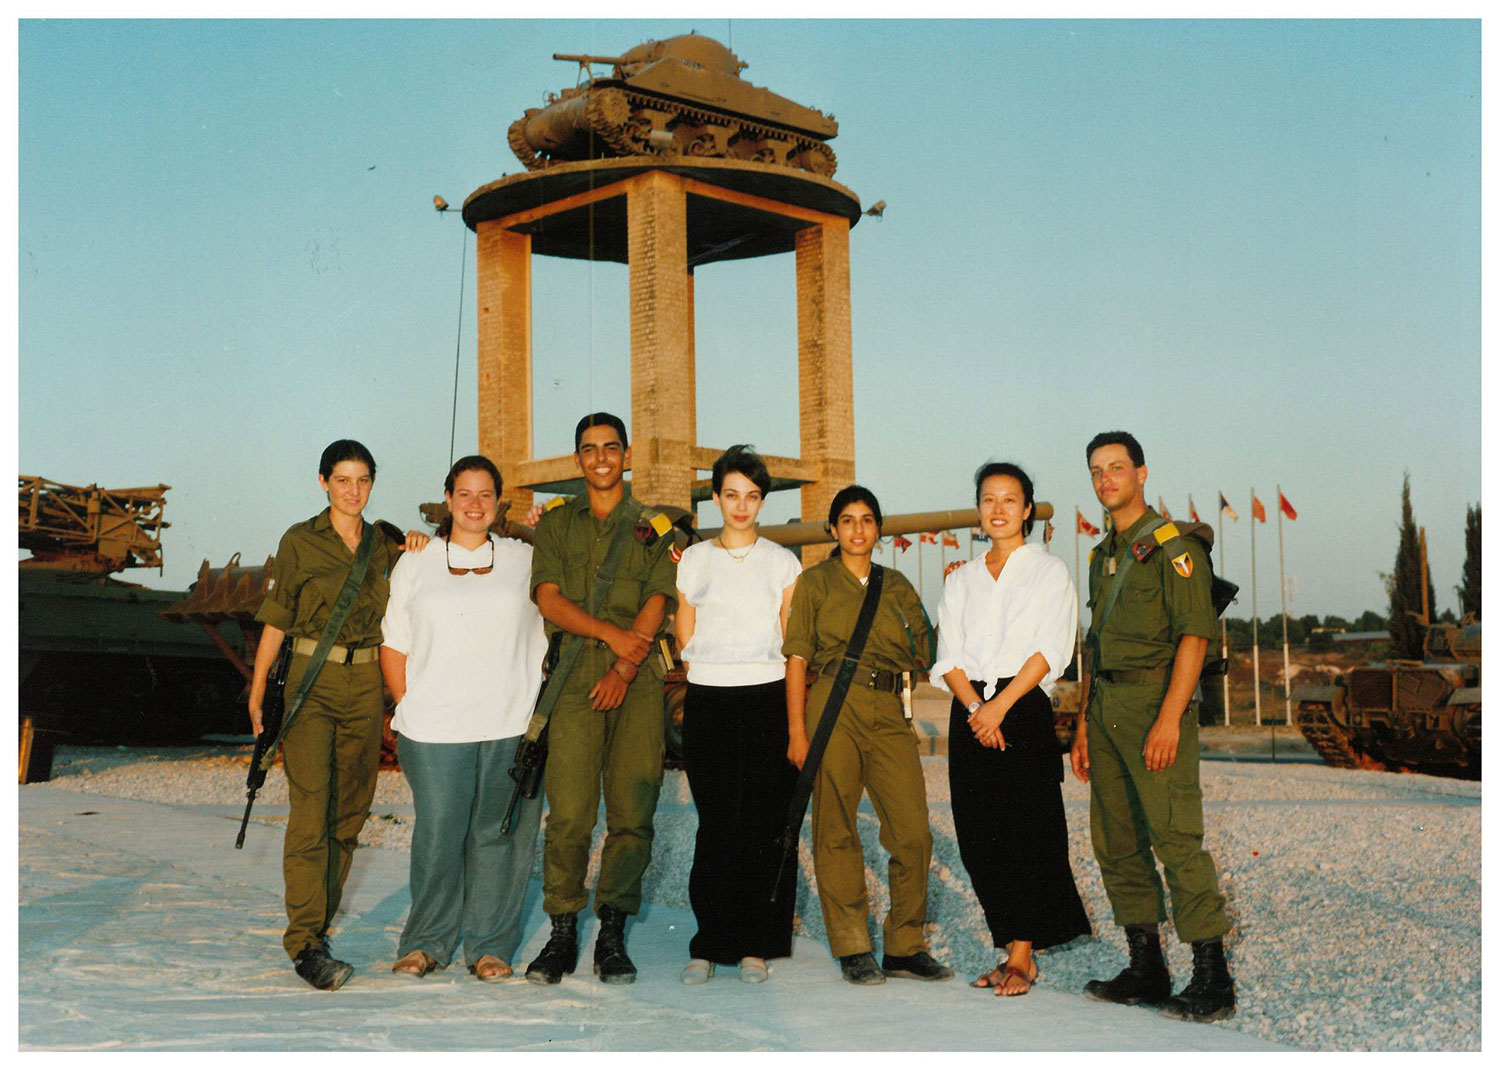 NWS Fellows with Latrun Soldiers